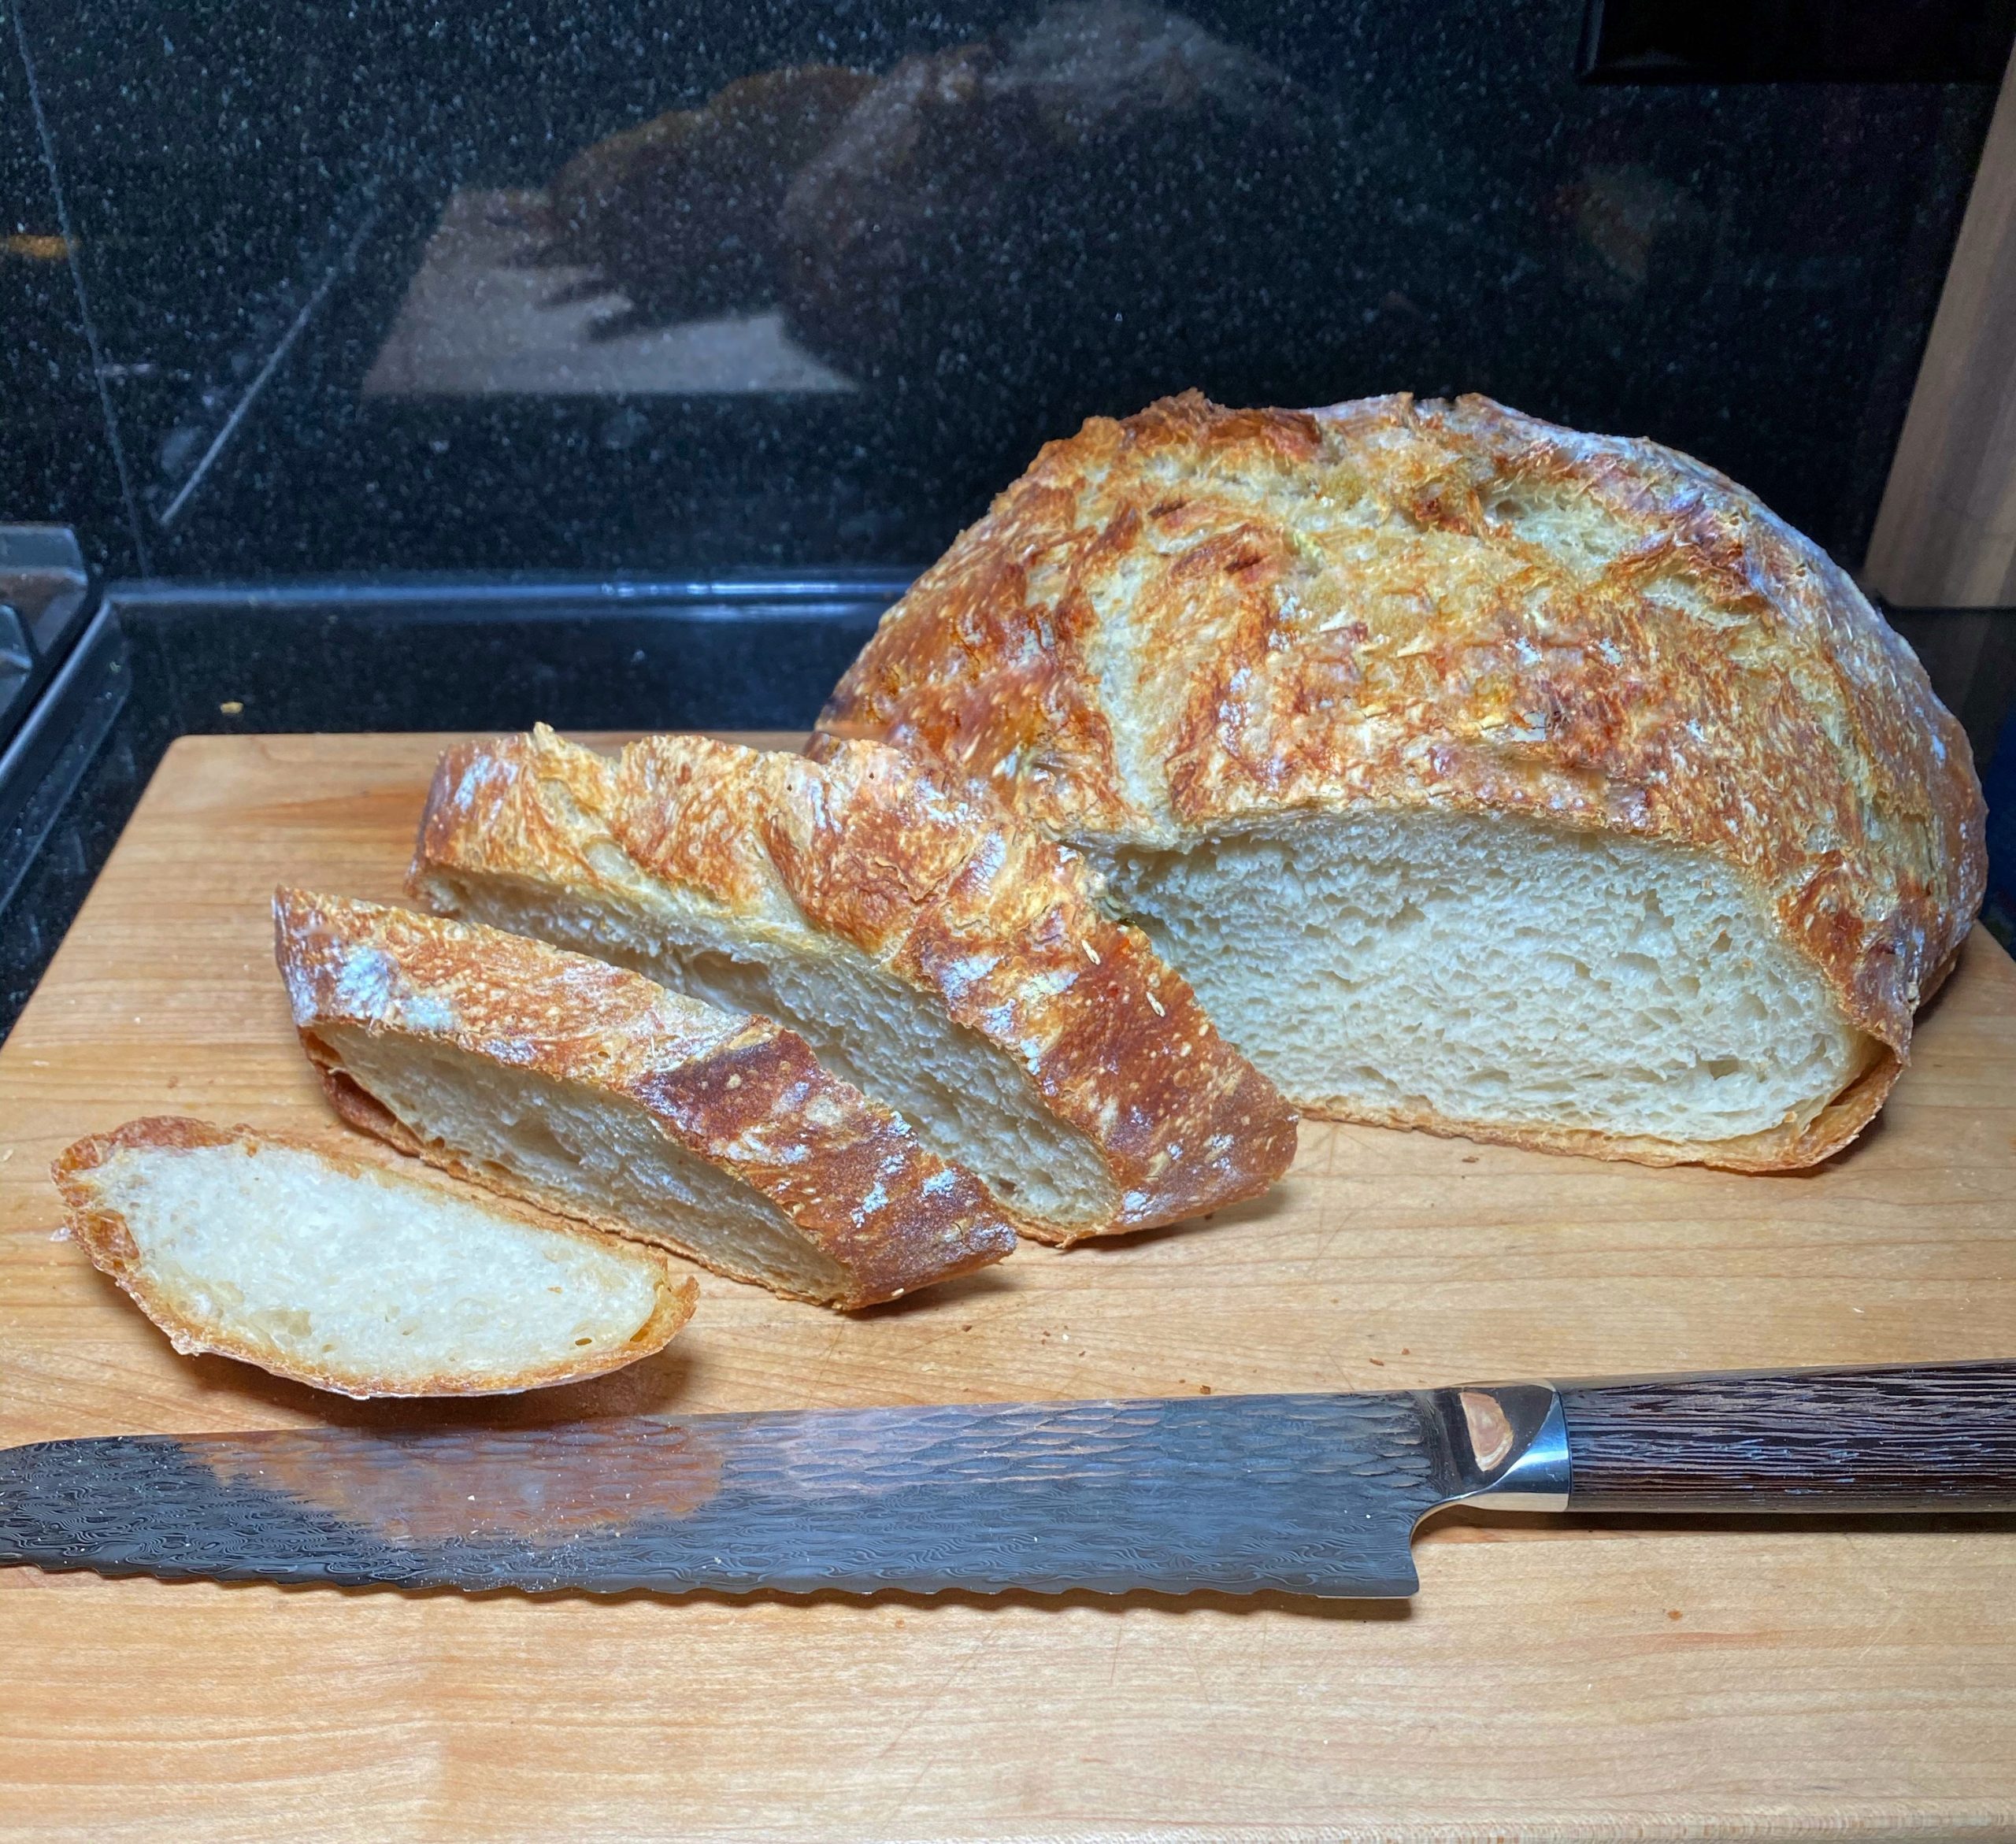 I Tried the New Le Creuset Bread Oven - and I Love It